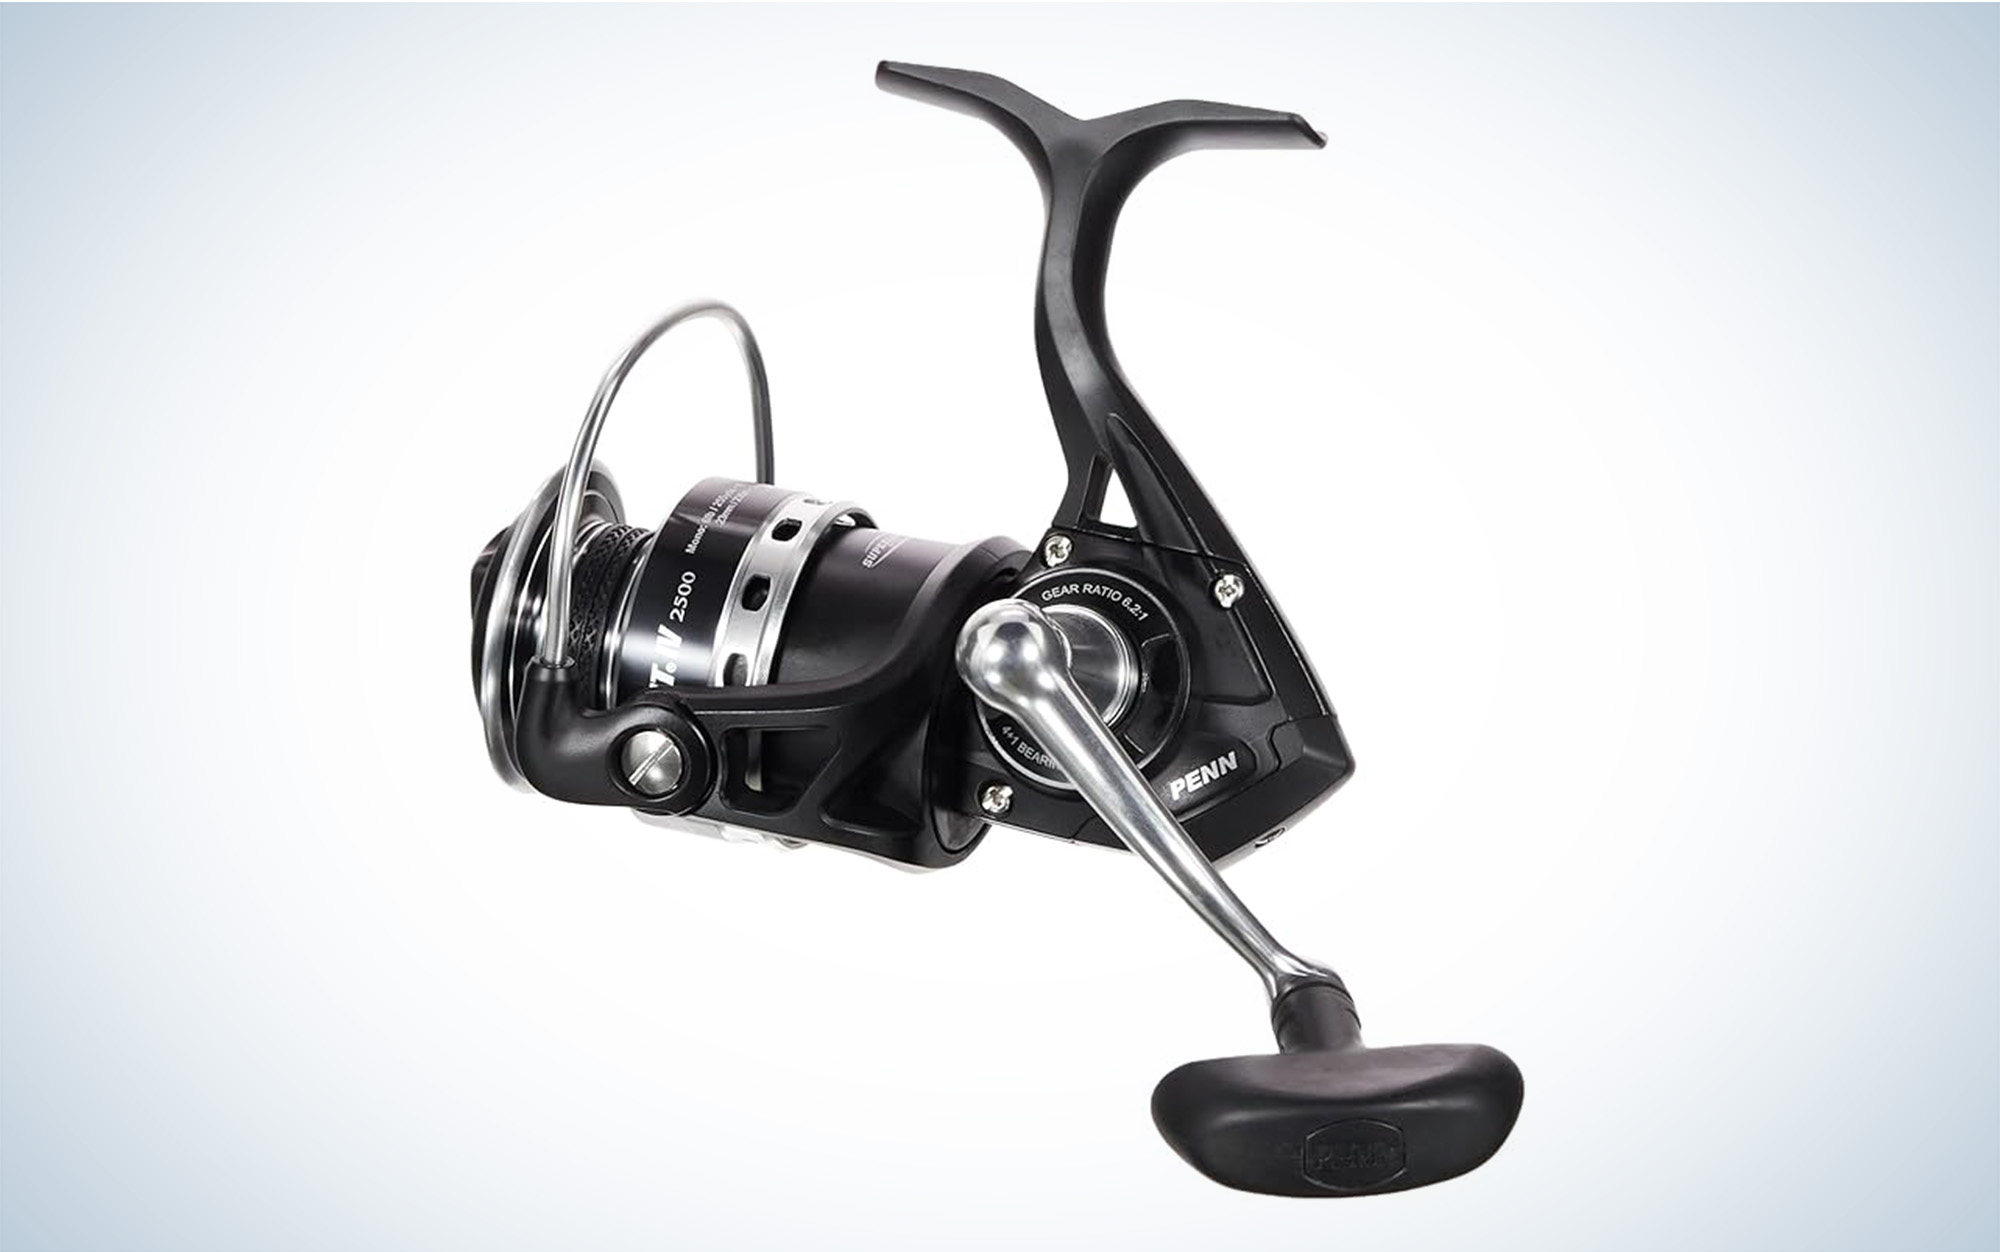 Comparable To SHIMANO Spinning Reel Fishing Accessories 40Kg Max Drag Power Saltwater  Fishing Reel 17+